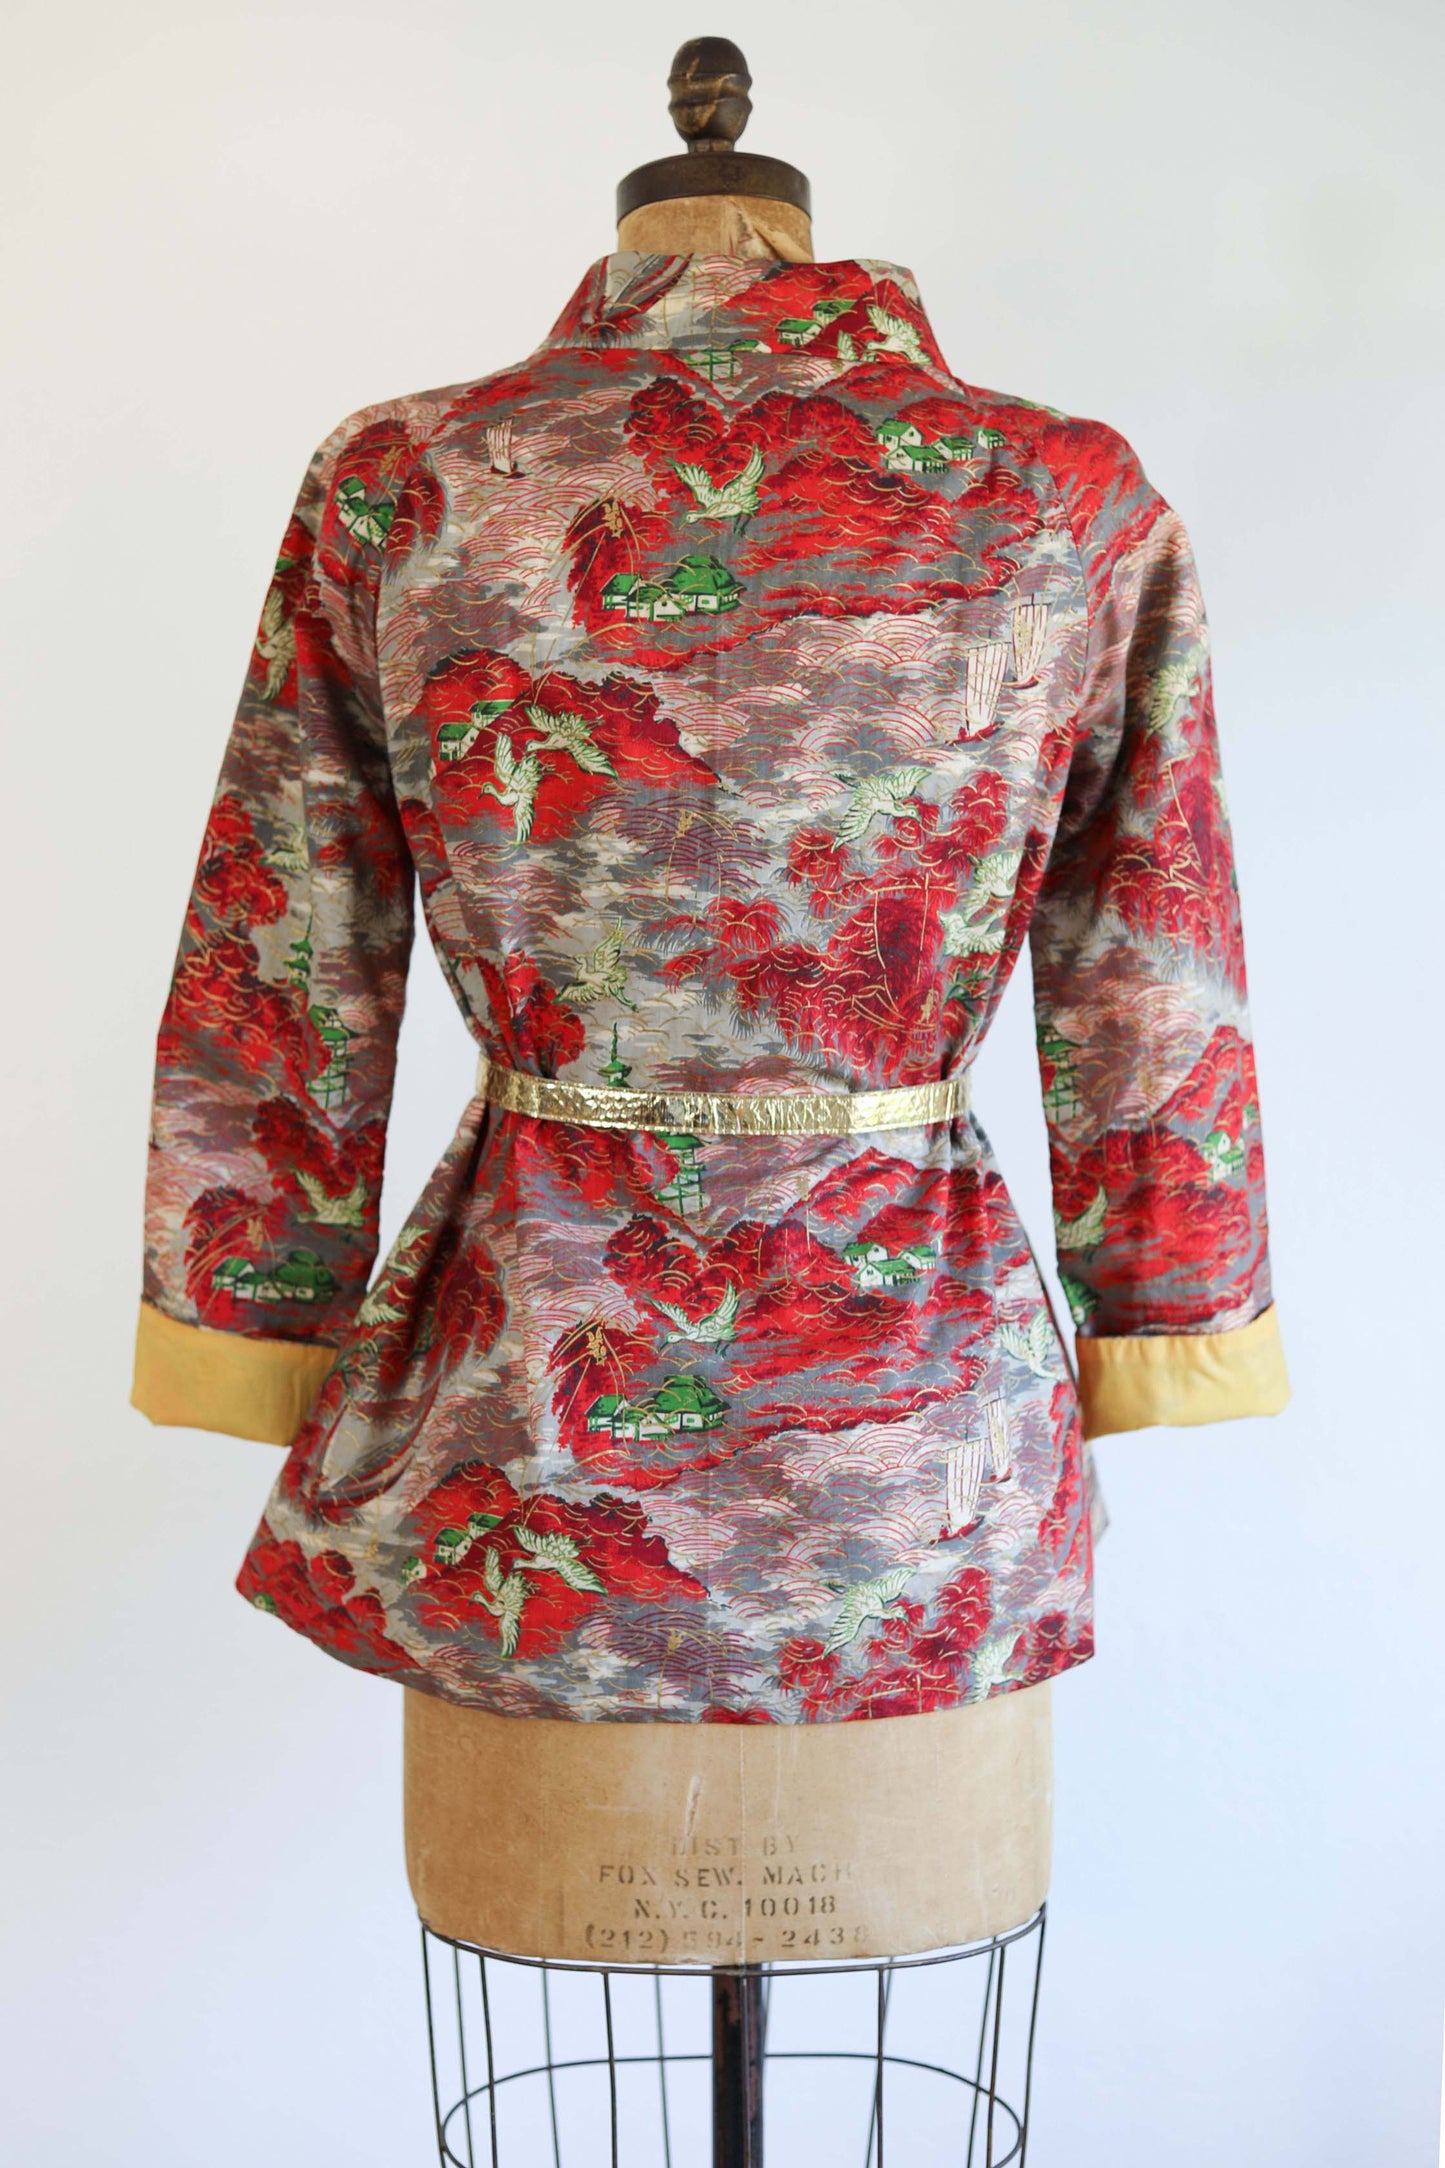 Vintage 1940s to 1950s Lounging Jacket - Stunning Deep Red + Metallic Gold Sailing Ship + Cottage Print Cotton Size XS to M